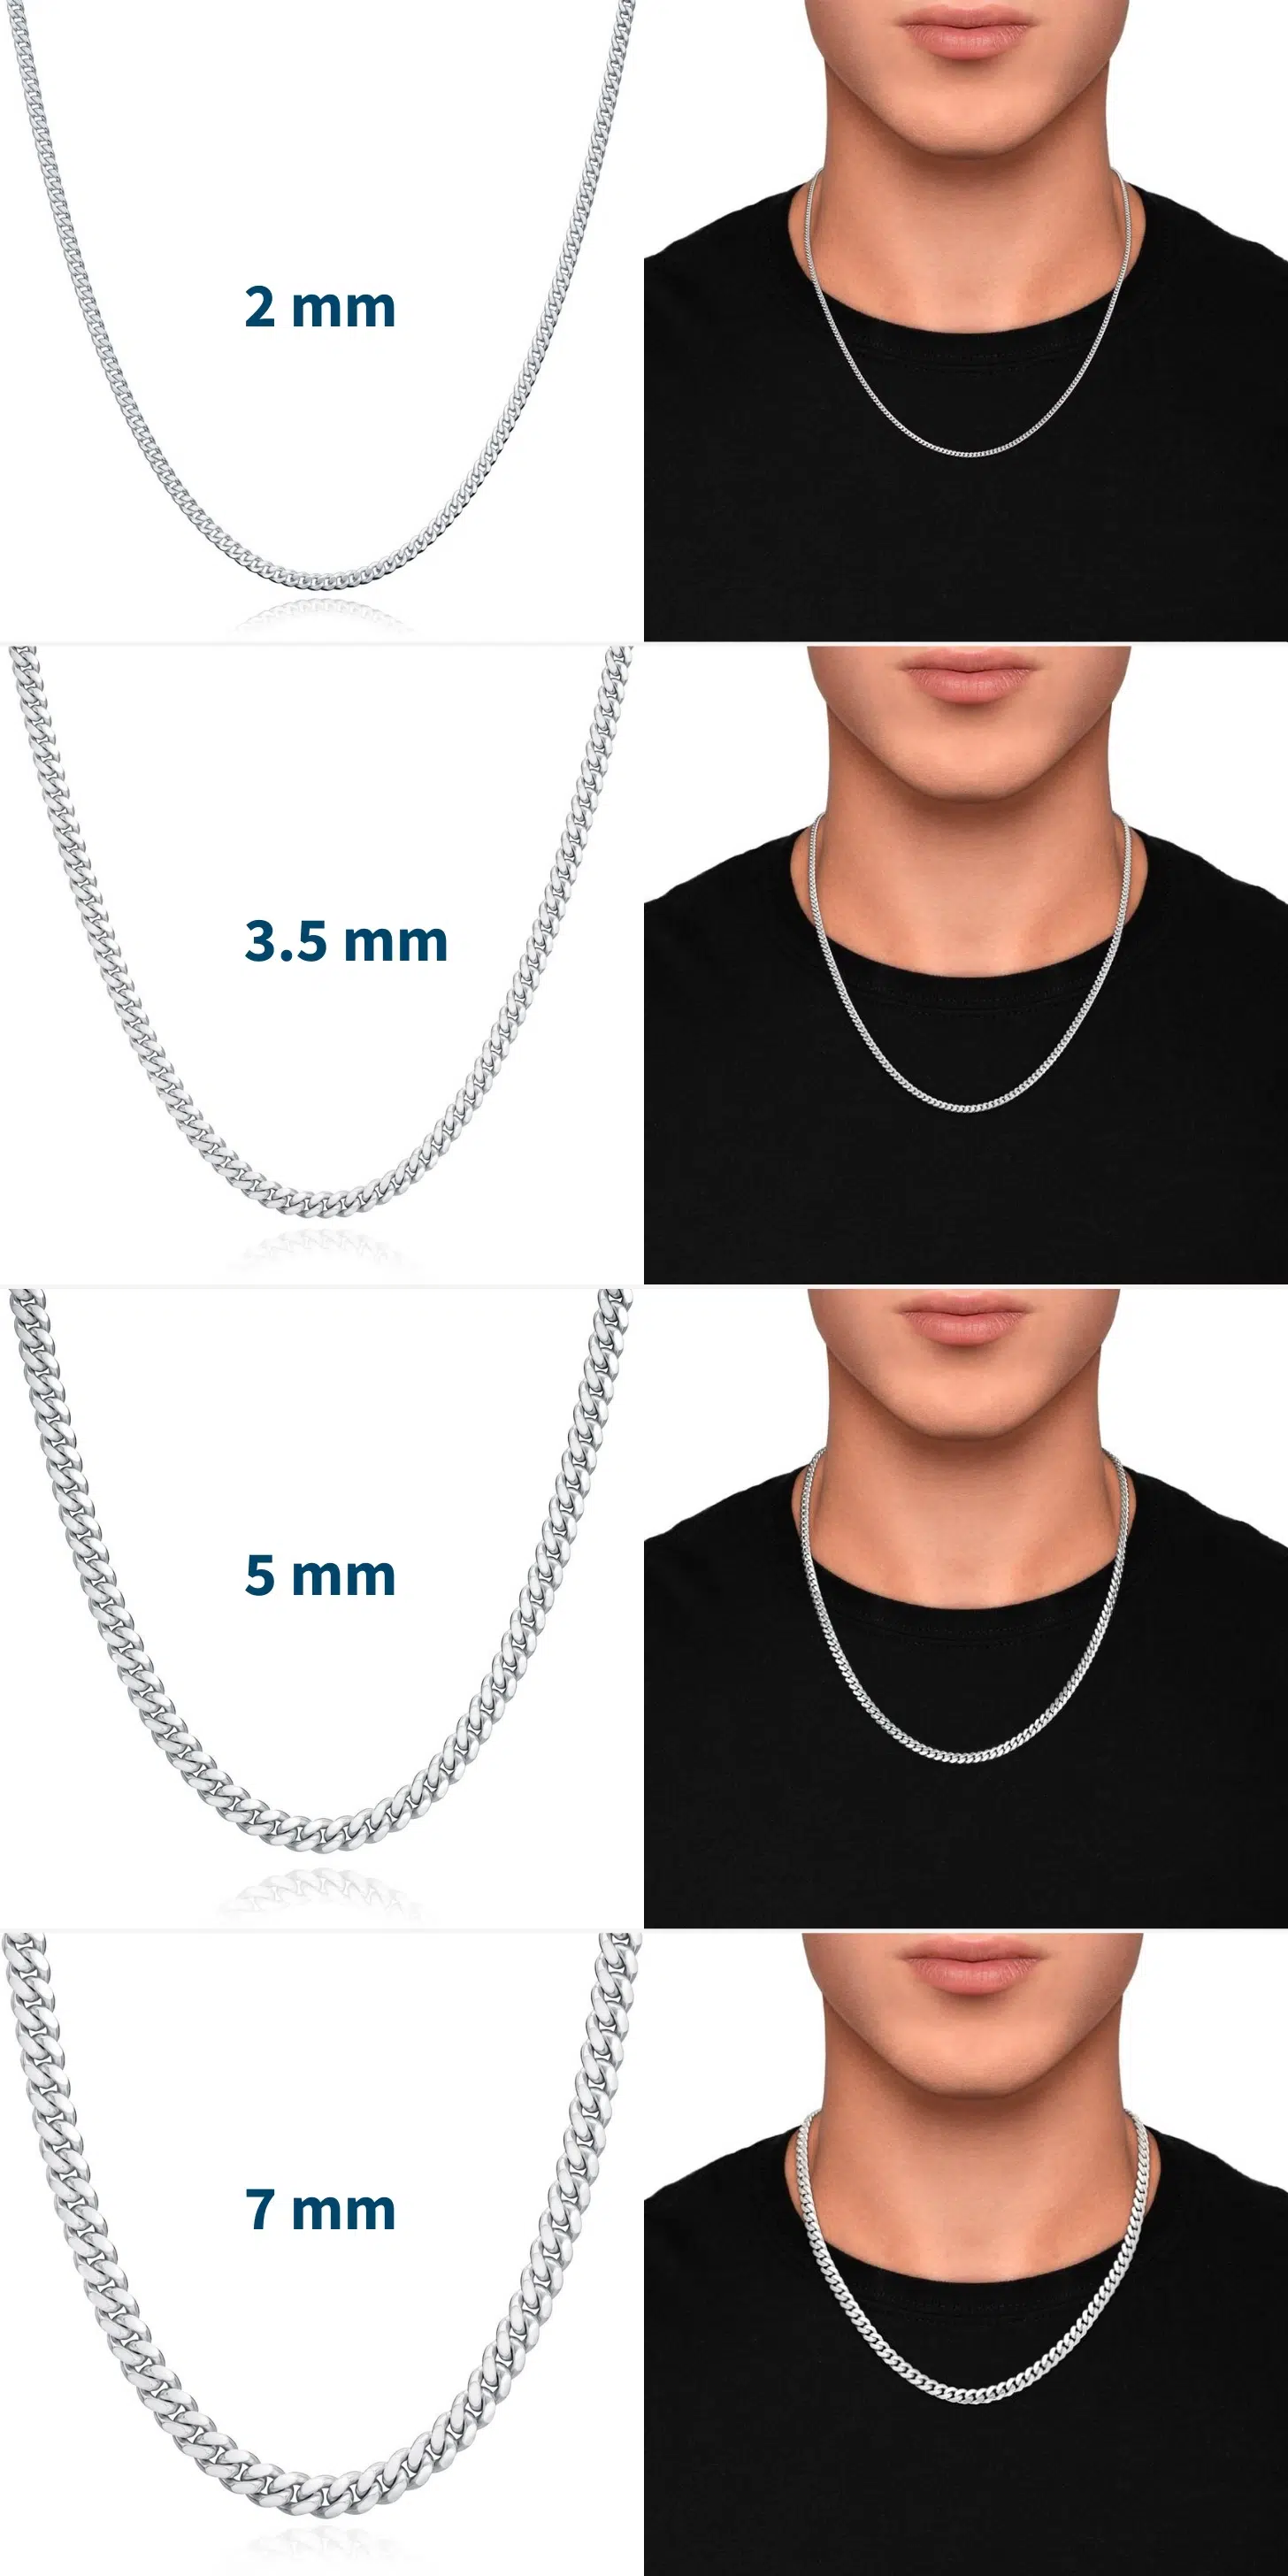 Chain necklace width chart